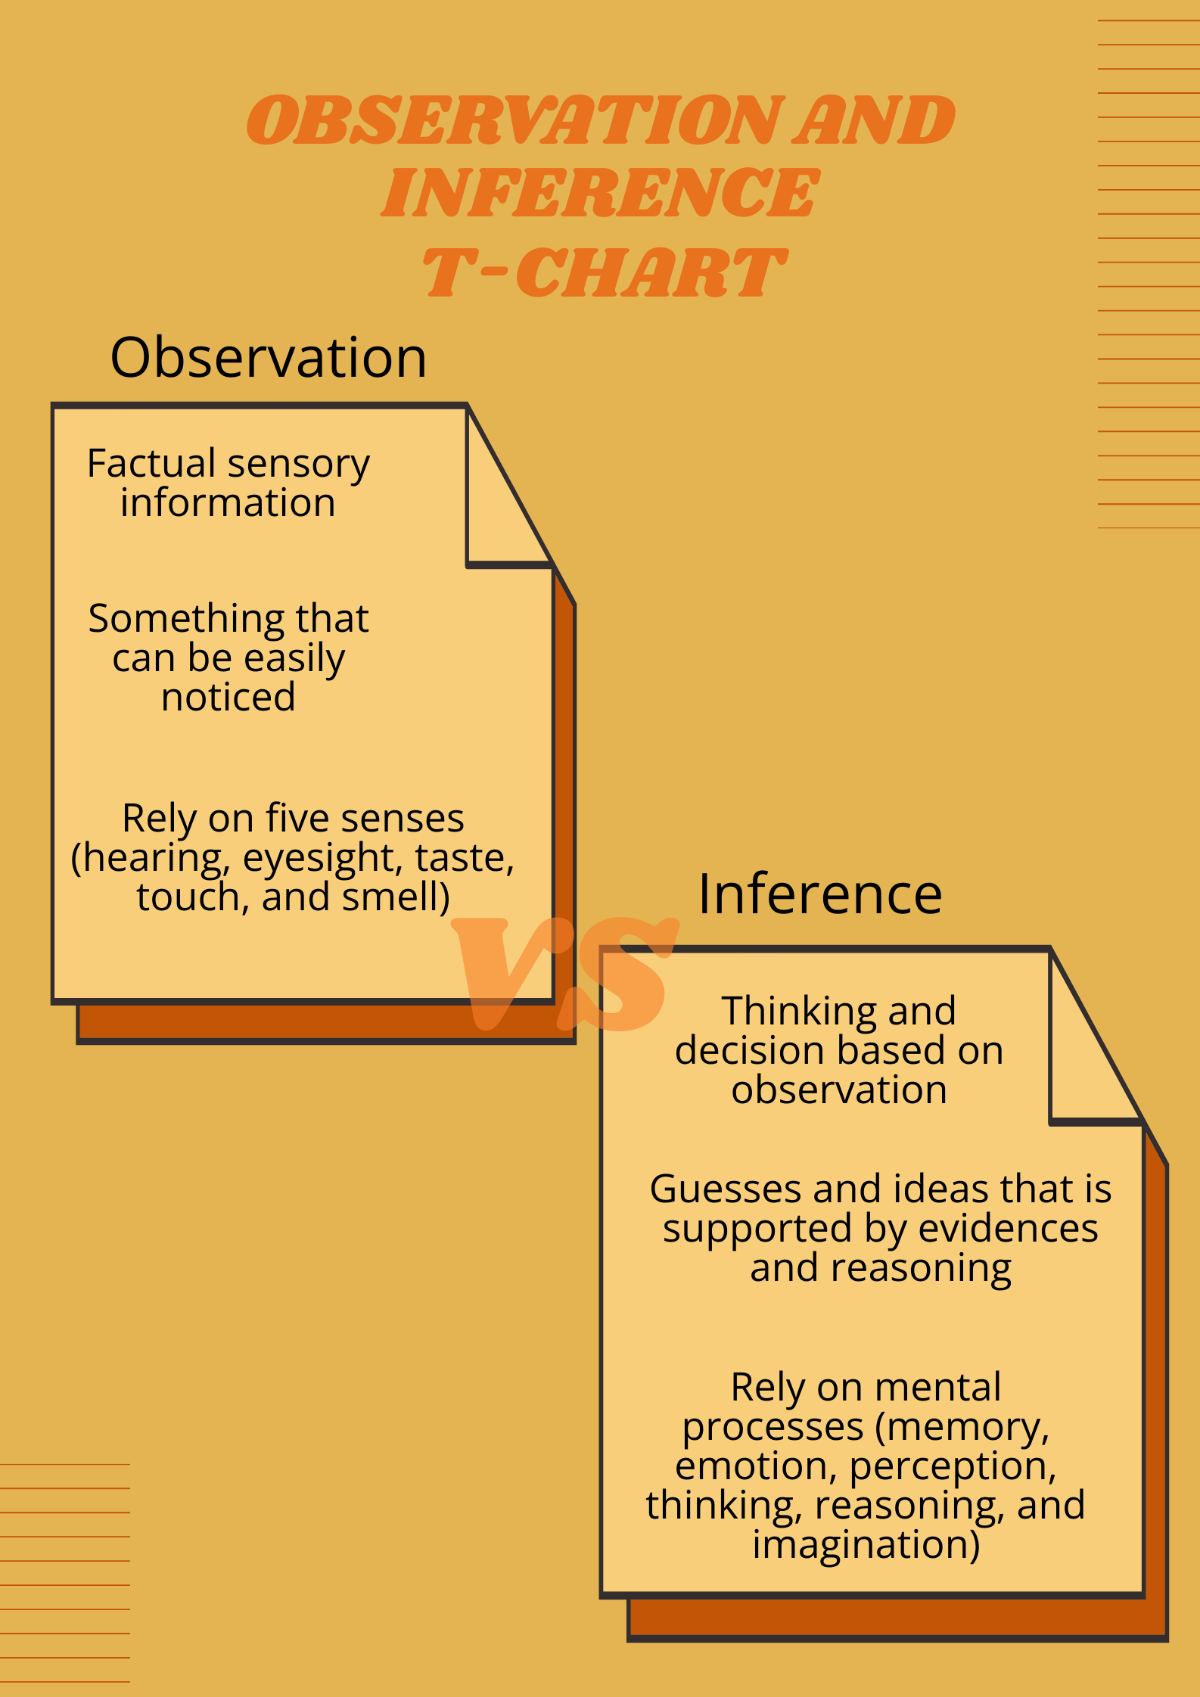 Observation and Inference T-Chart